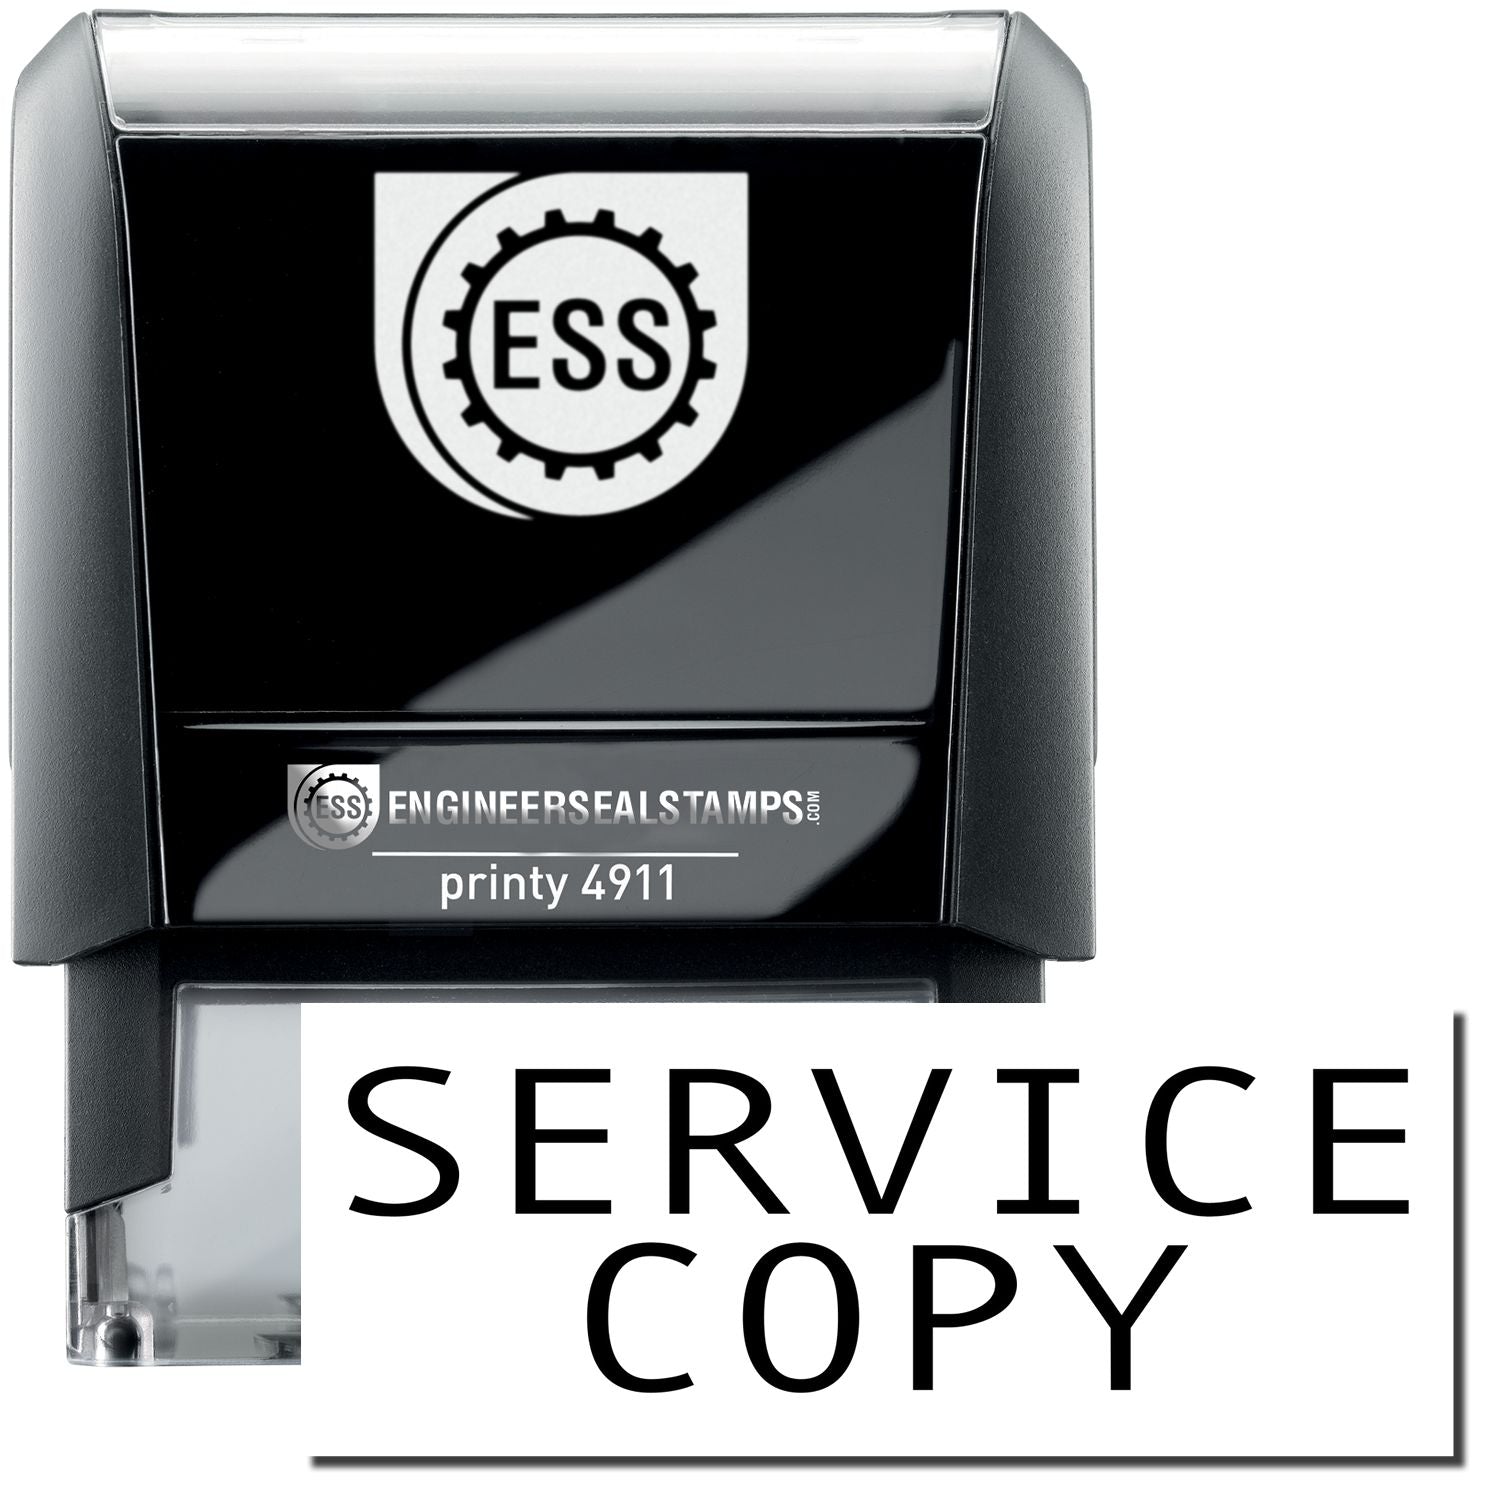 A self-inking stamp with a stamped image showing how the text "SERVICE COPY" is displayed after stamping.